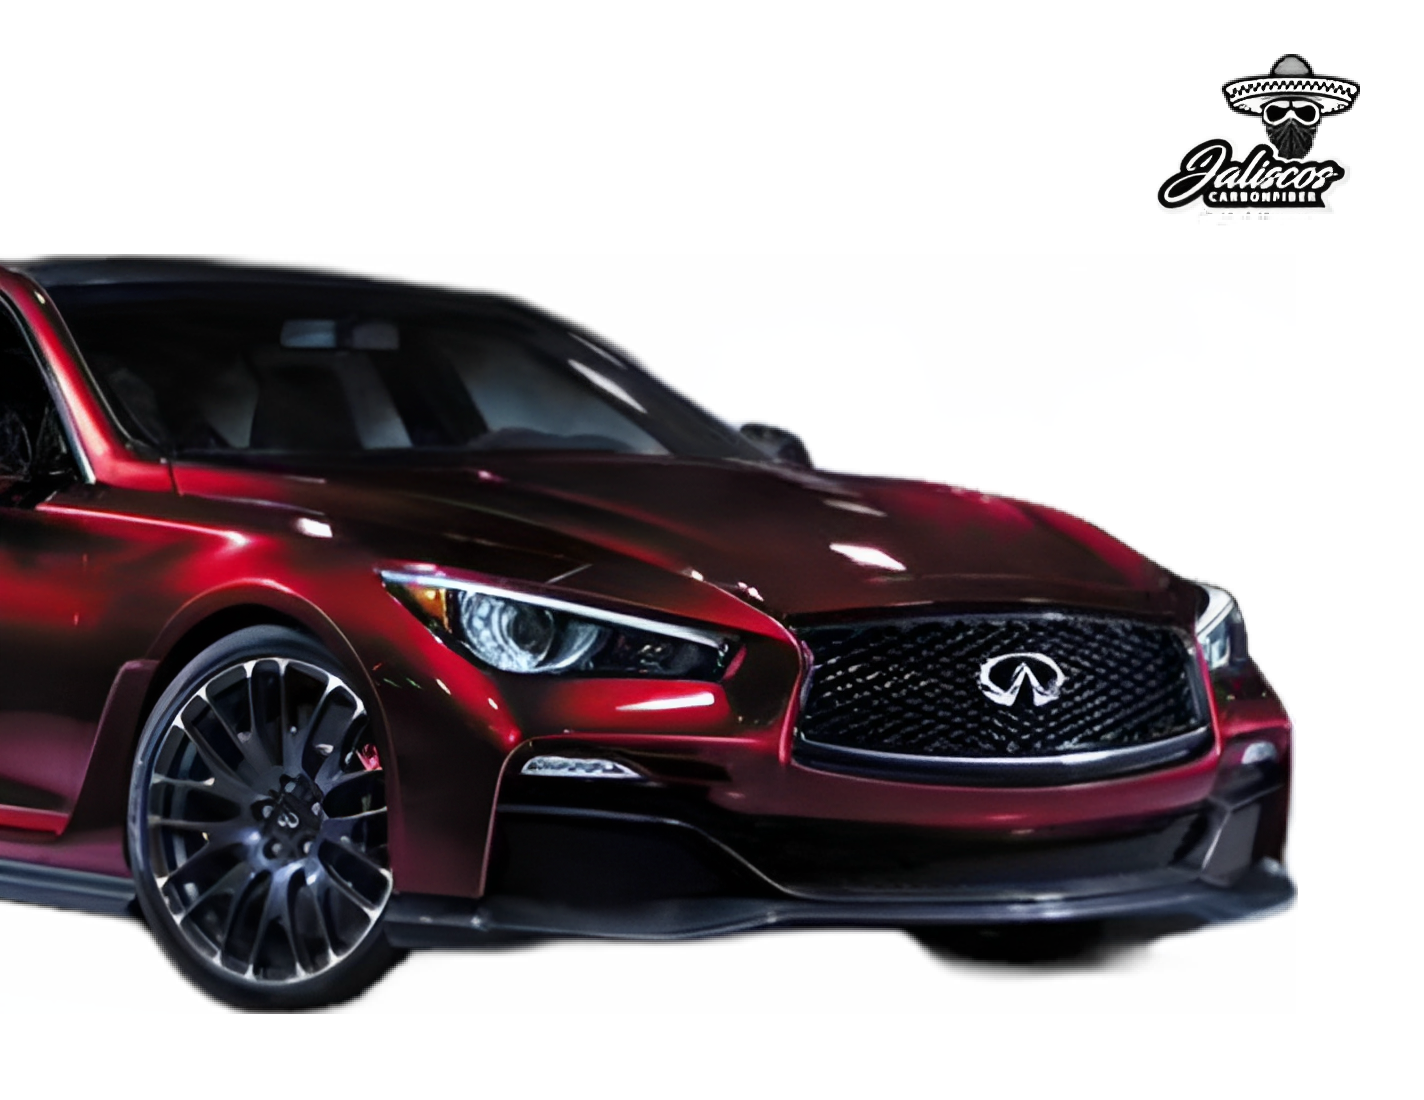 A front three-quarter view of a red Infiniti Q50 featuring a prominent grille with the Infiniti logo, aggressive headlights, and a sporty front bumper. The image is similarly edited with portions of the background erased and the "Jalisco Carbonfiber" logo in the upper right corner. The car exhibits a mix of luxury and performance characteristics.